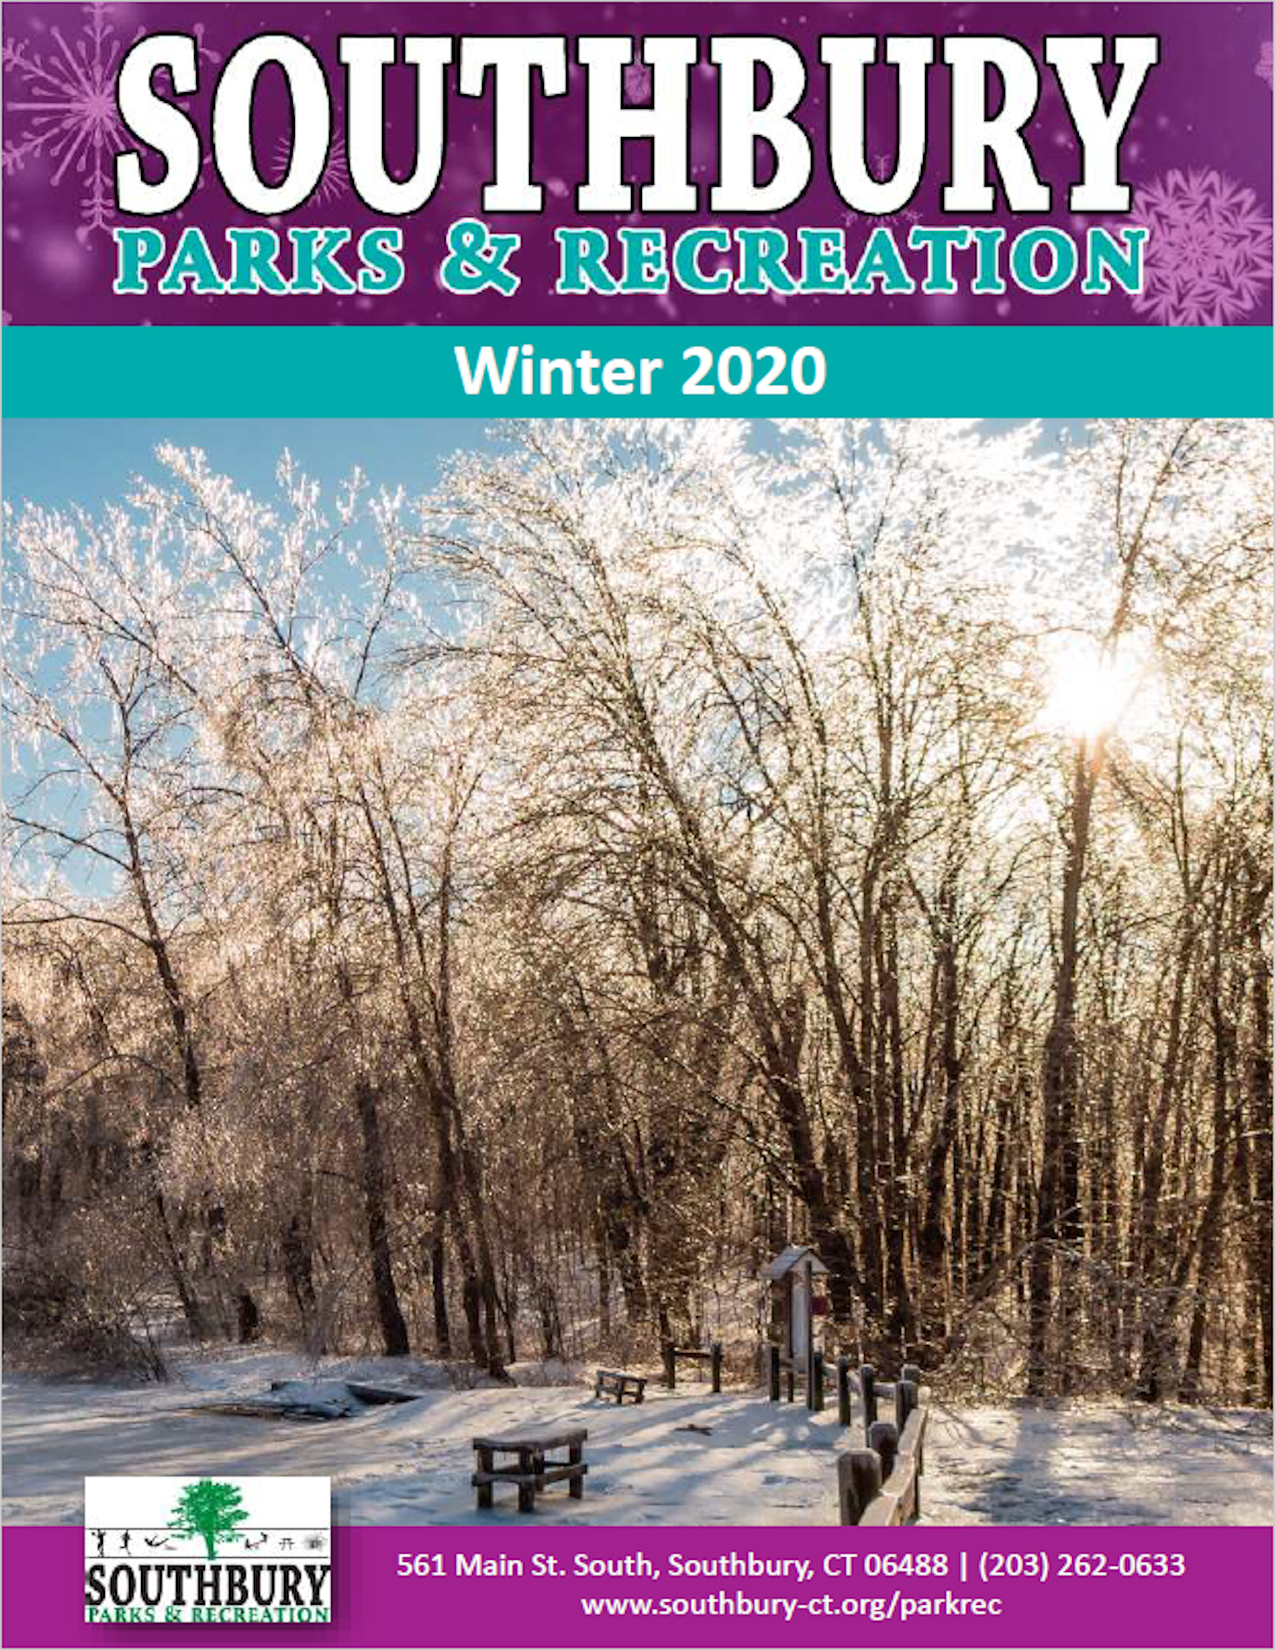 The Winter 2020 Brochure from Southbury Parks and Rec